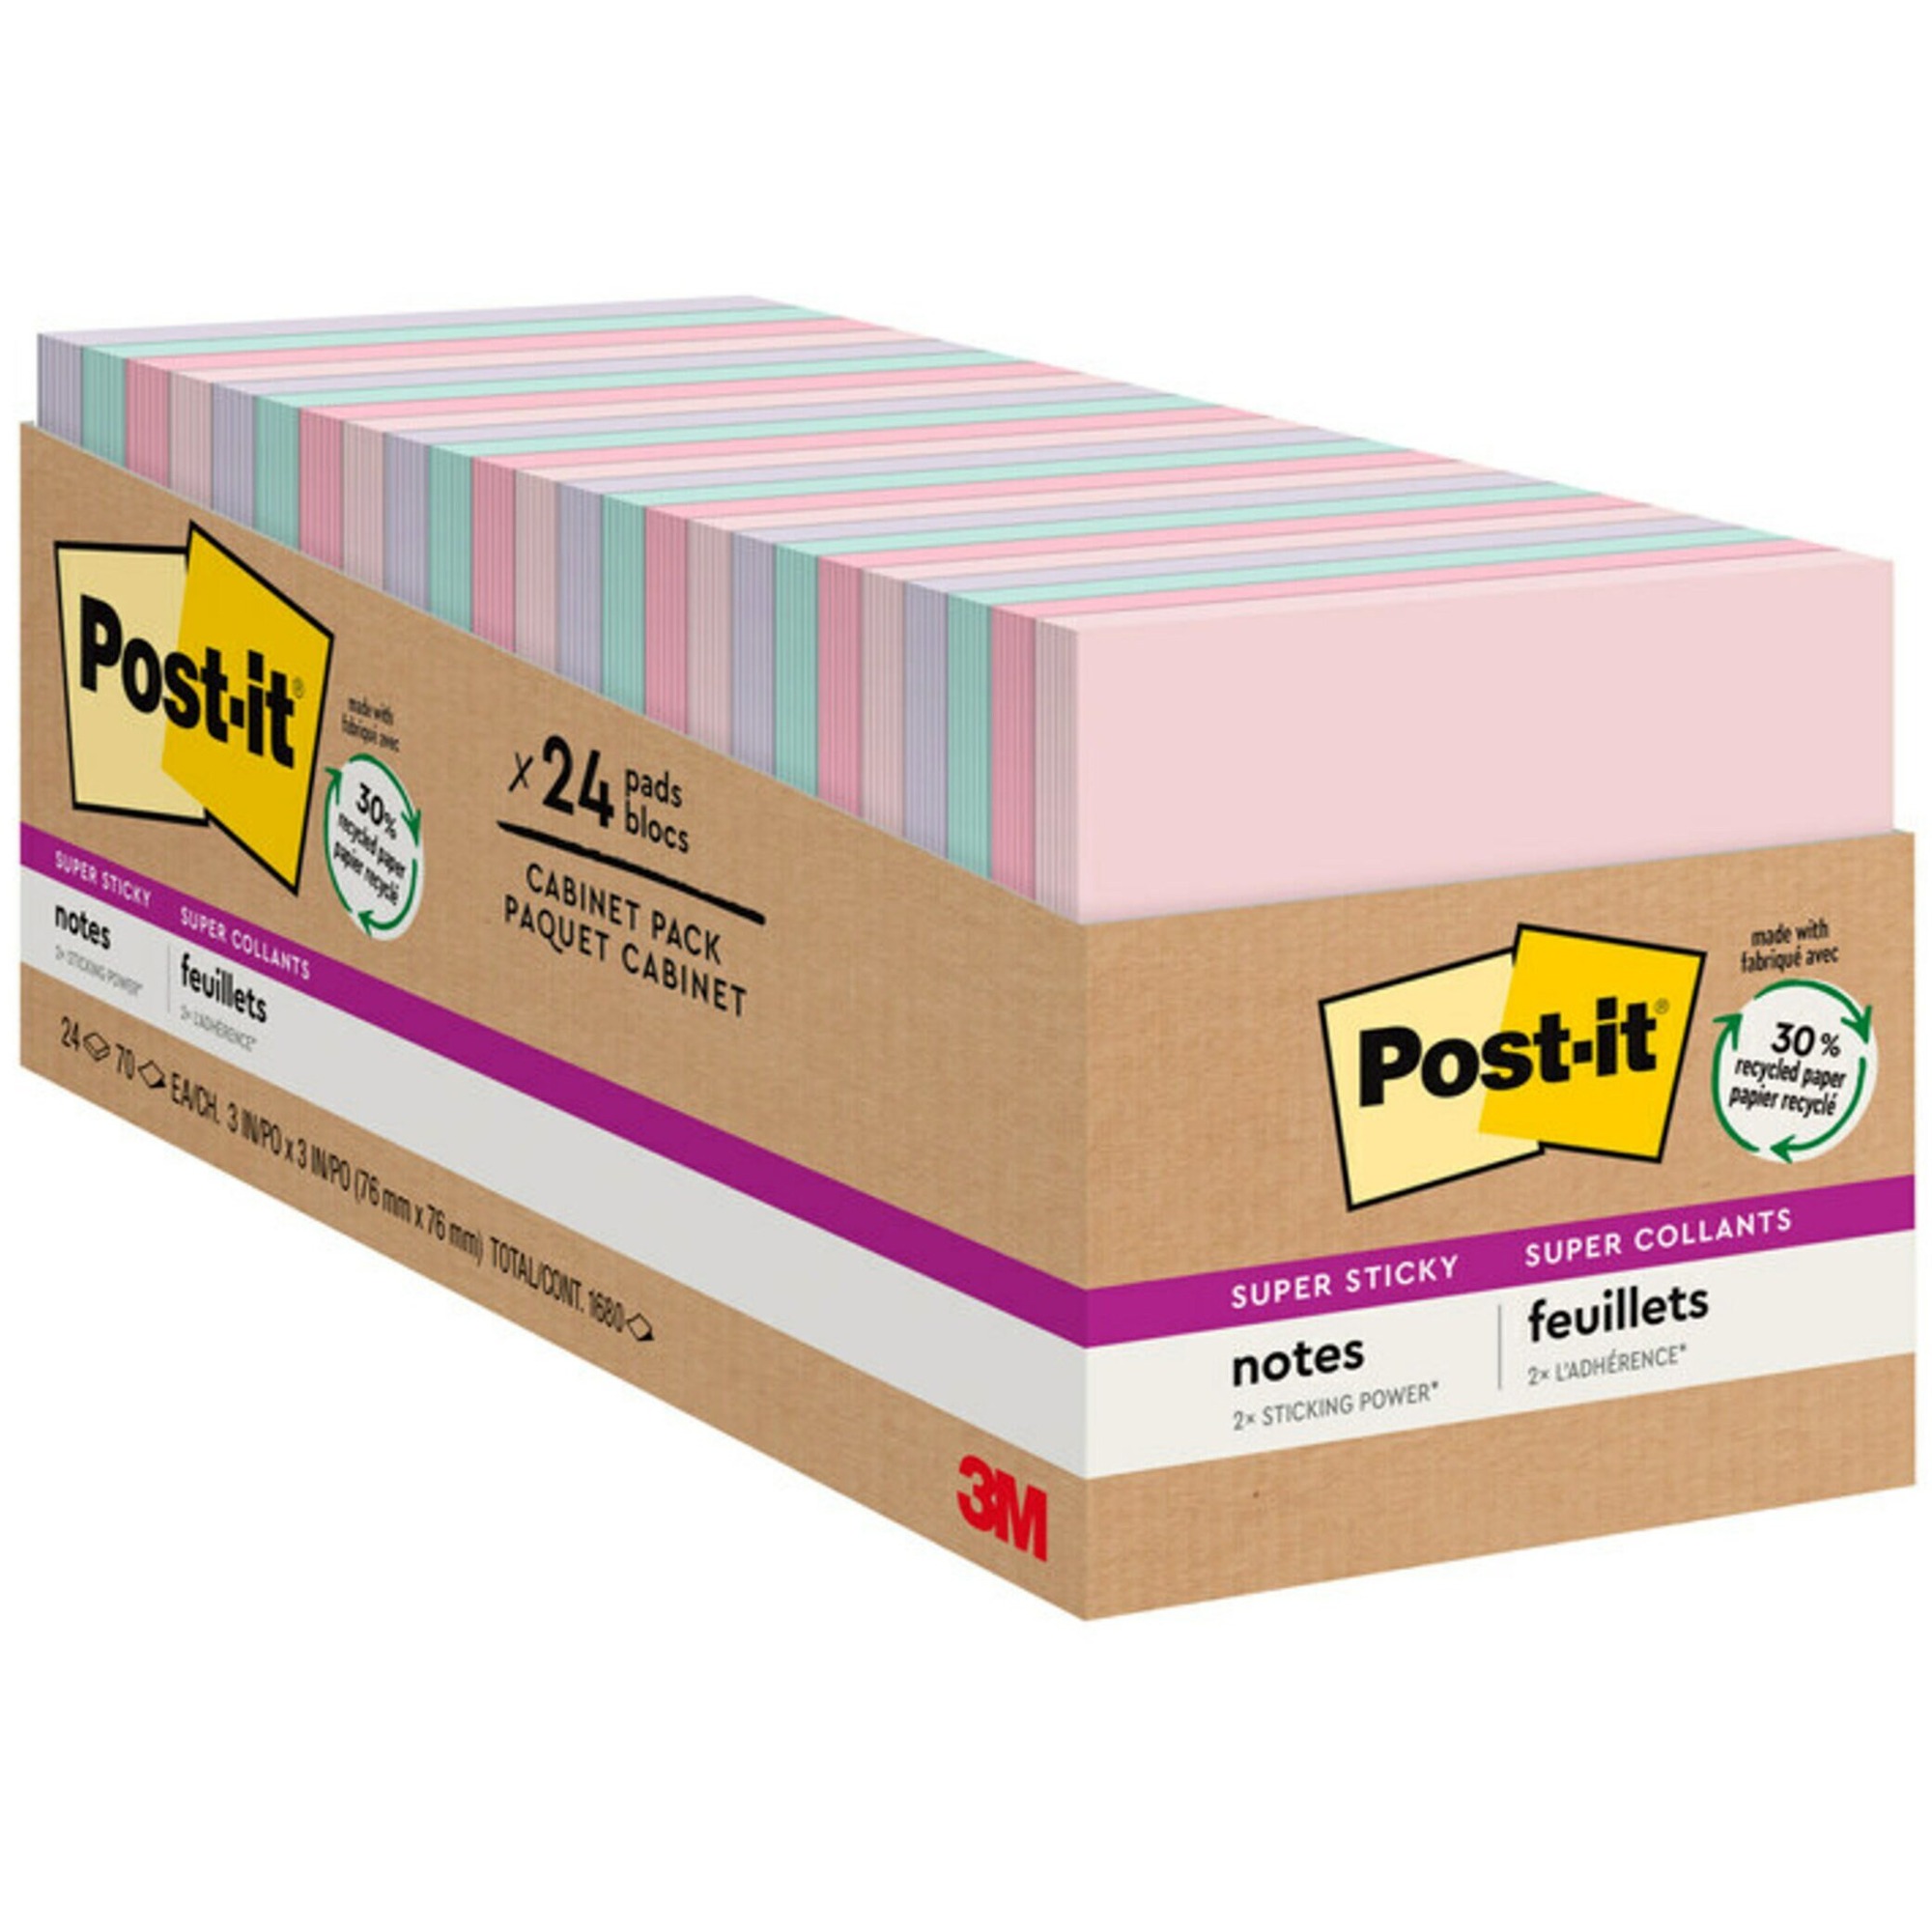 Small Post It Notes, Pack of 2400 Notes, Pastel Colors - 1-3/8 x 1 7/8